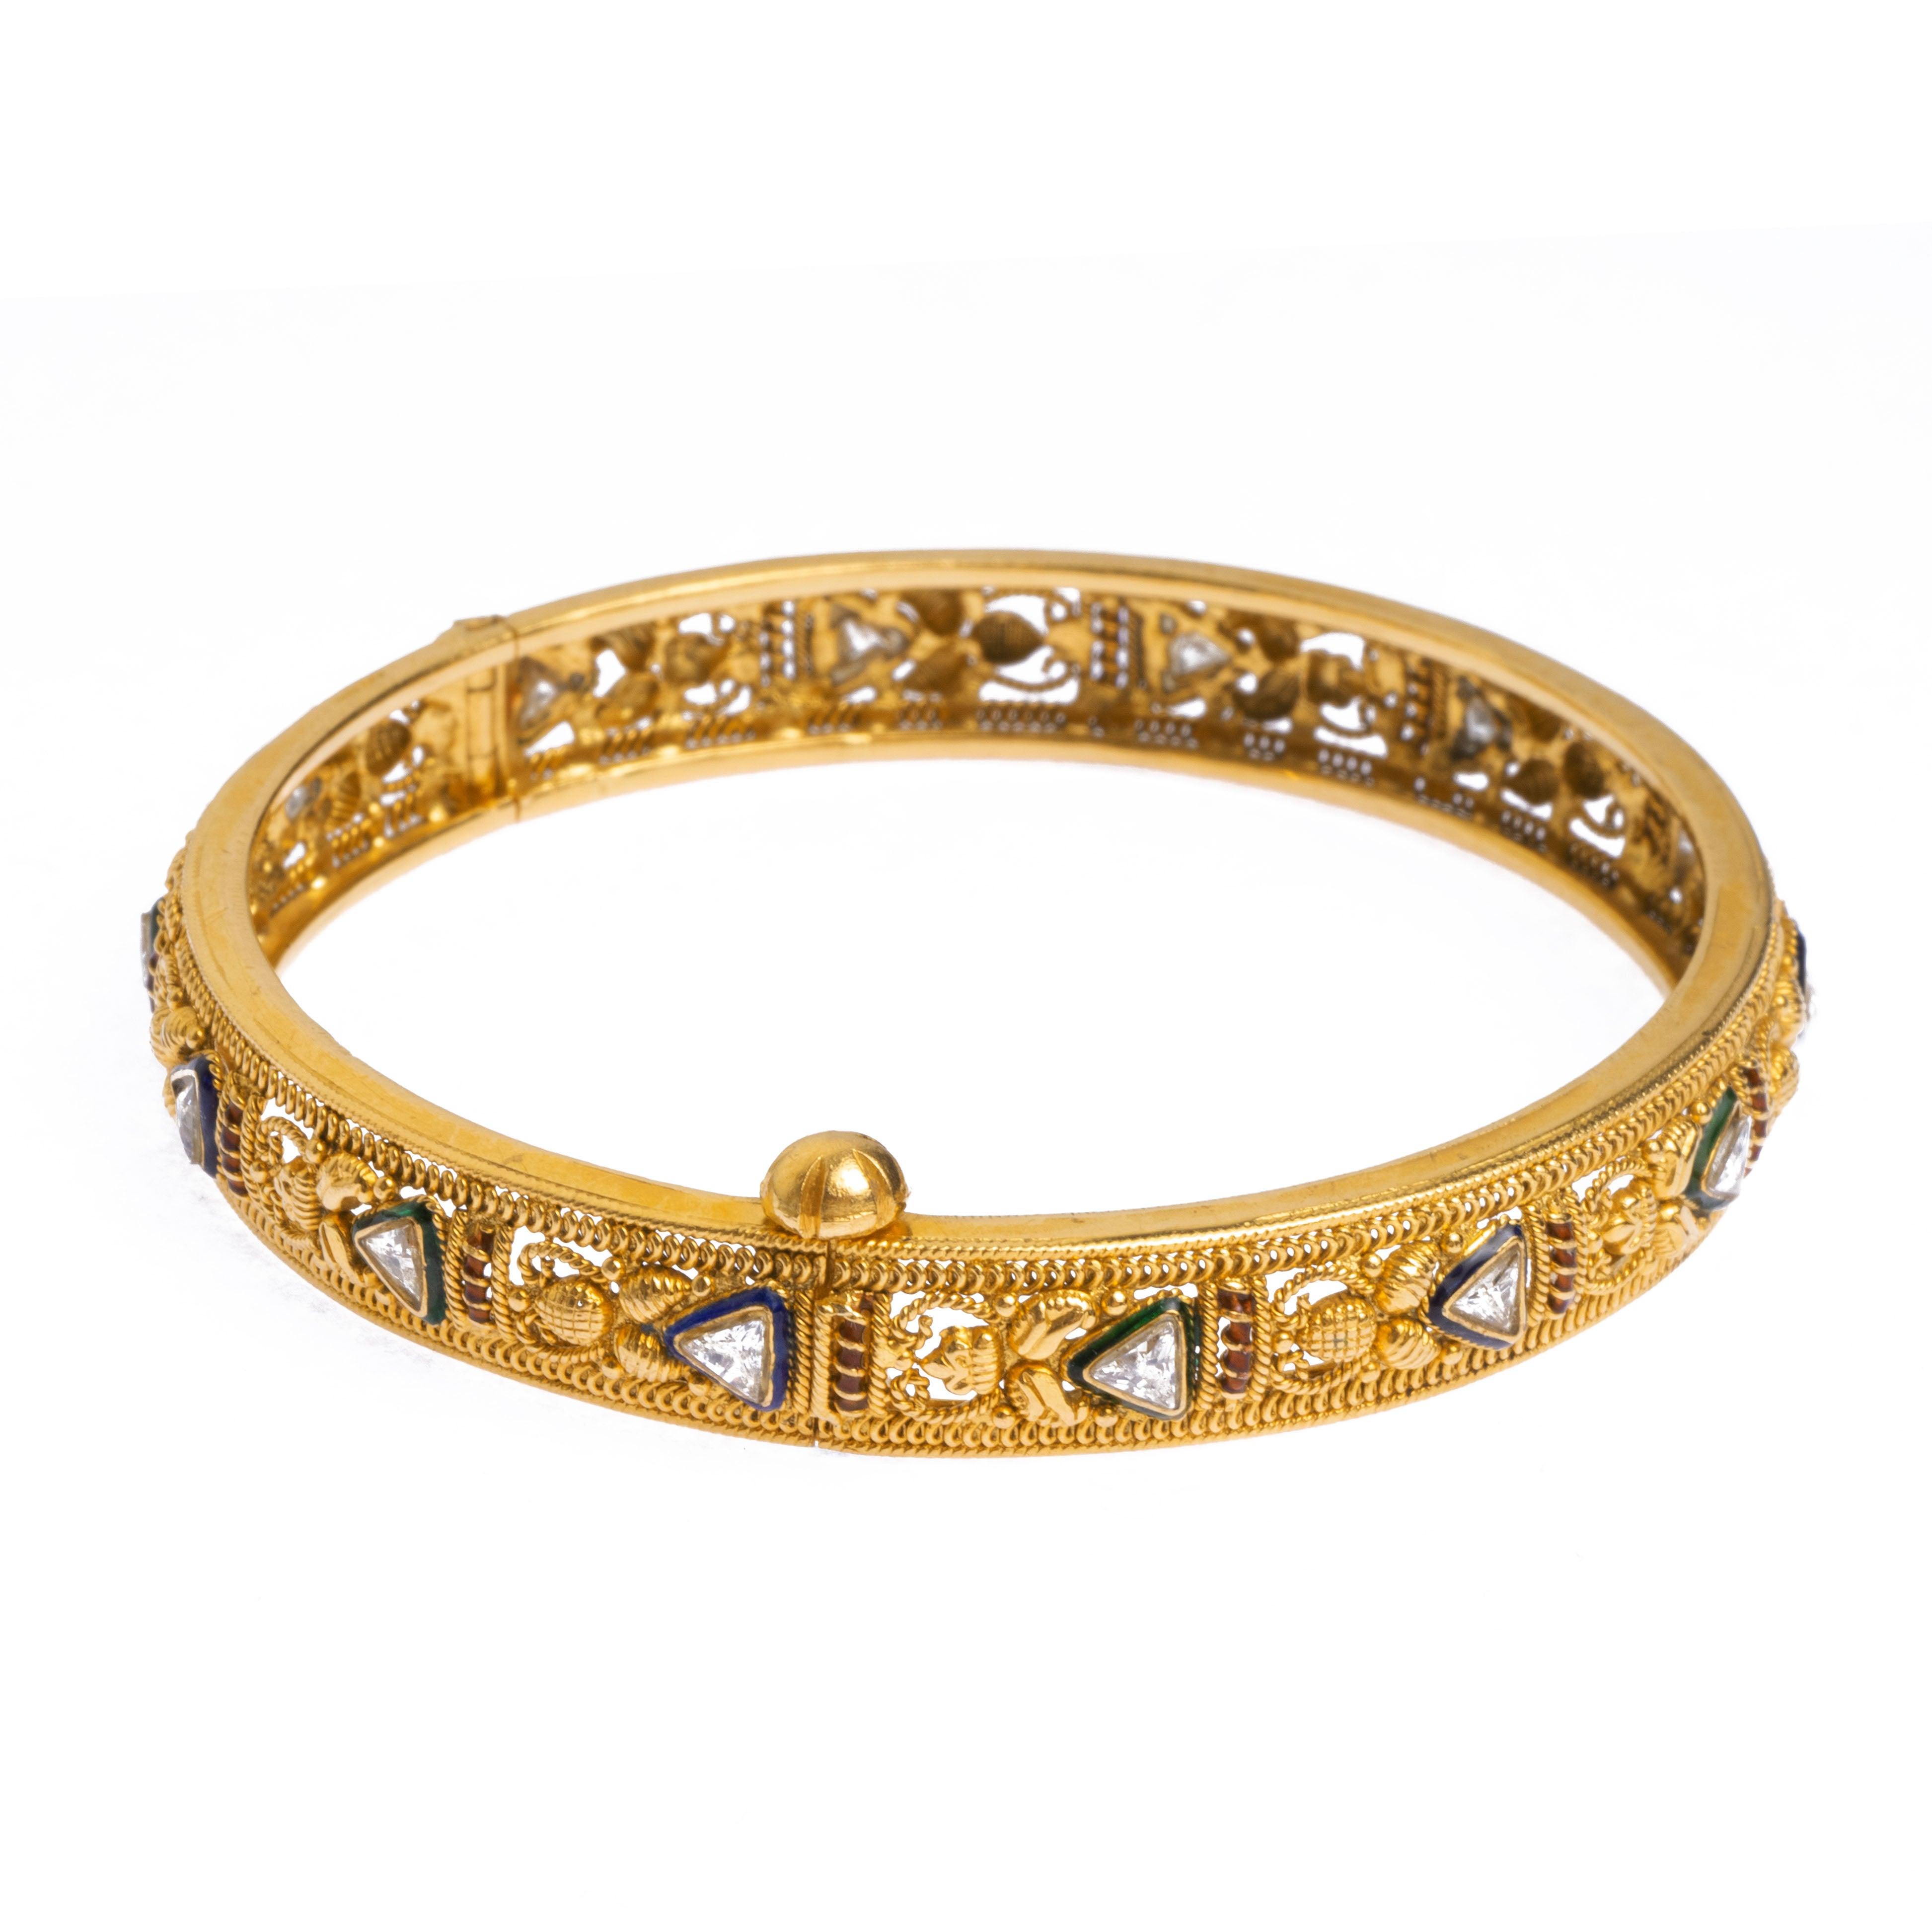 22ct Gold Antiquated Look Openable Bangle with Polki Style Stone (26.2g) B-8286 - Minar Jewellers